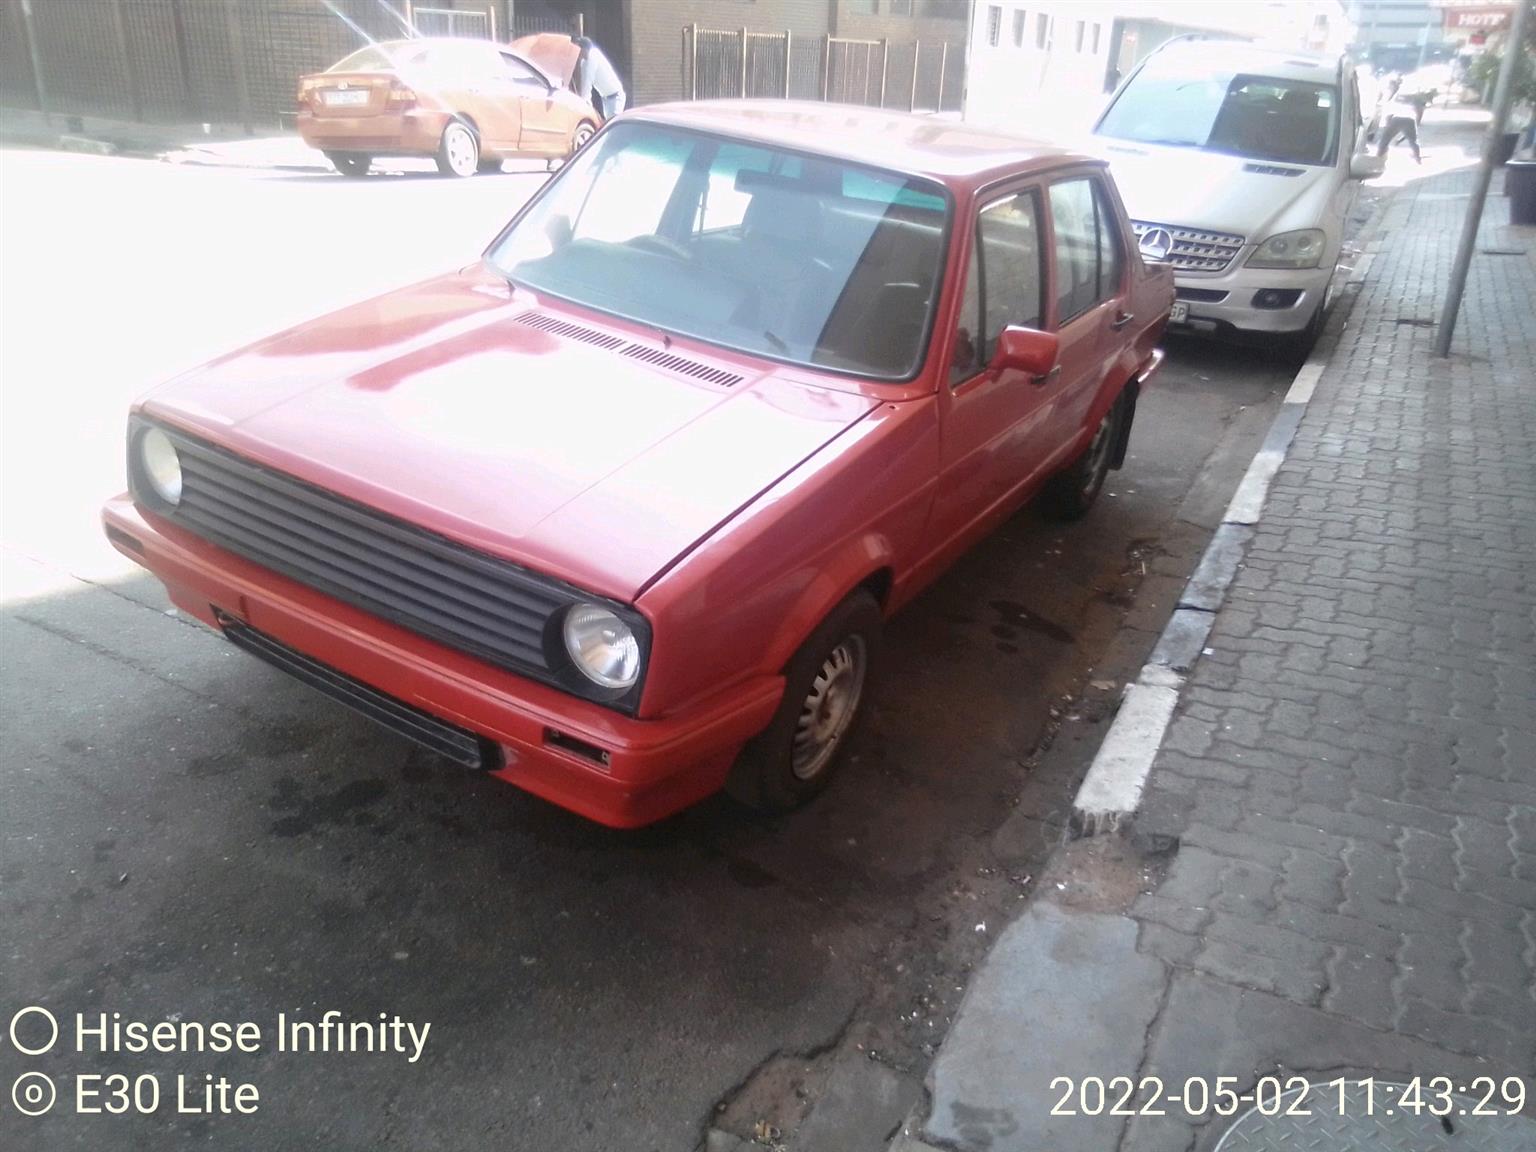 Vw fox 9190 for sale. Engine running good, body is very good